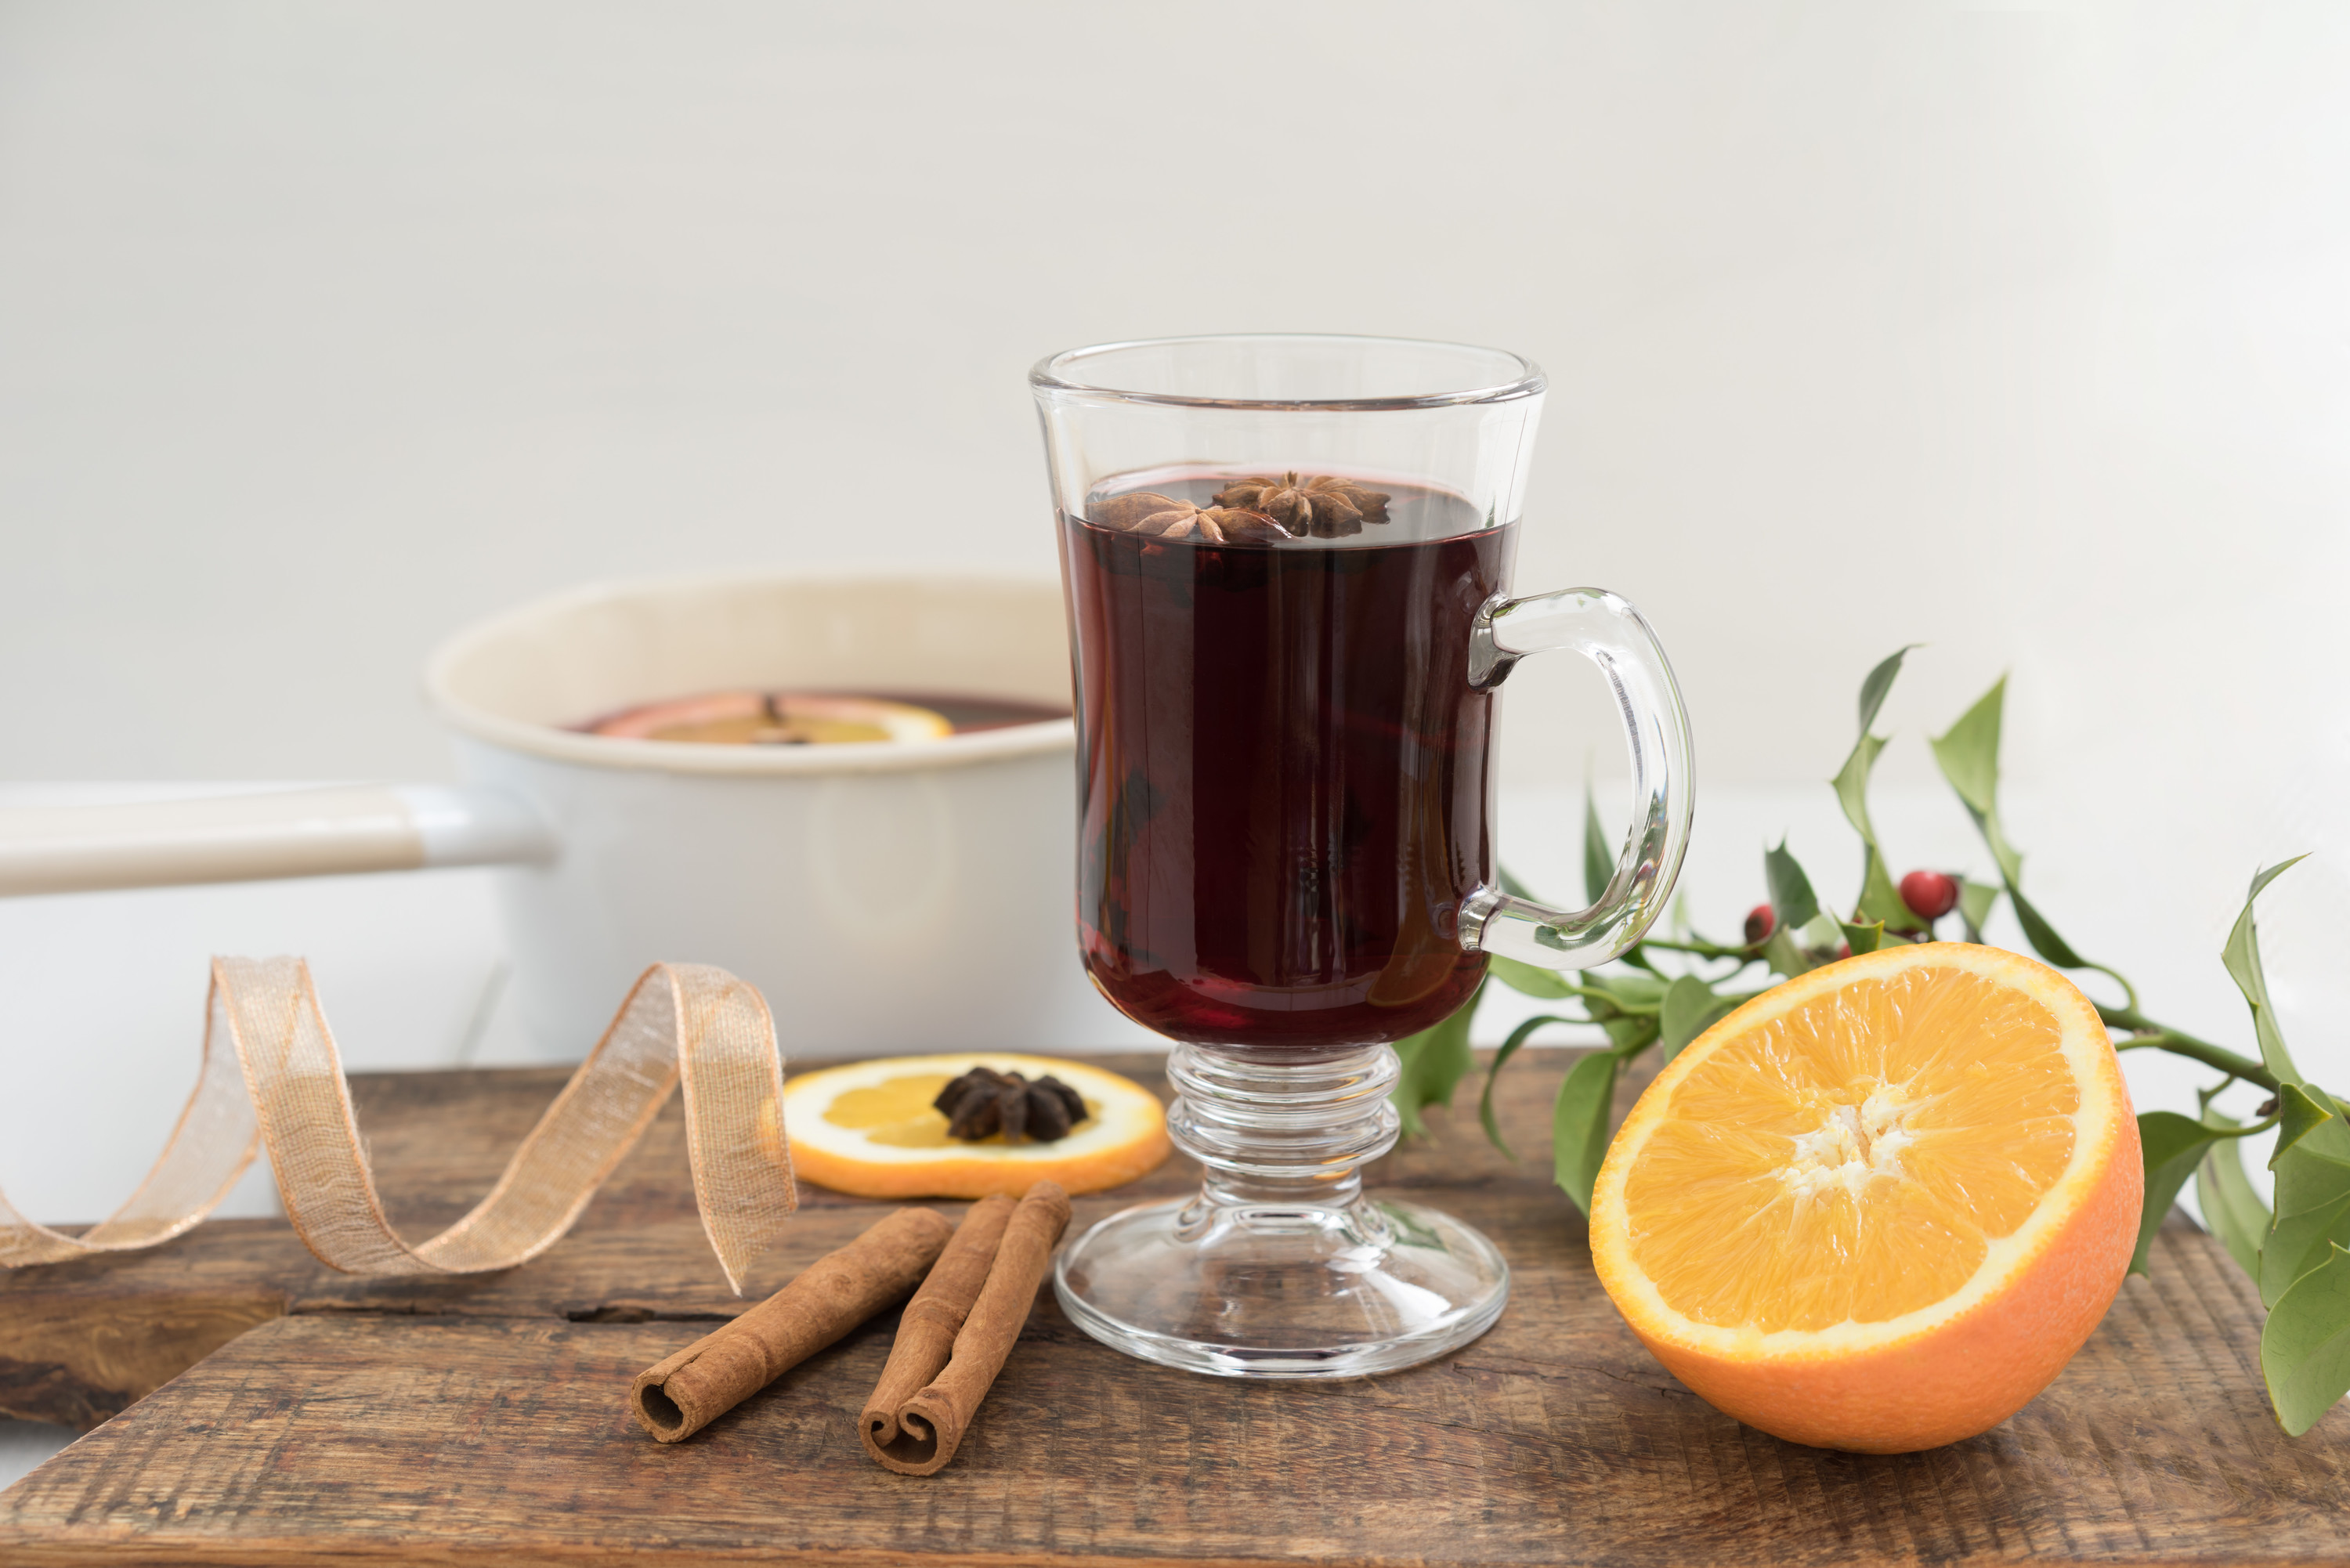 spiced mulled wine recipe